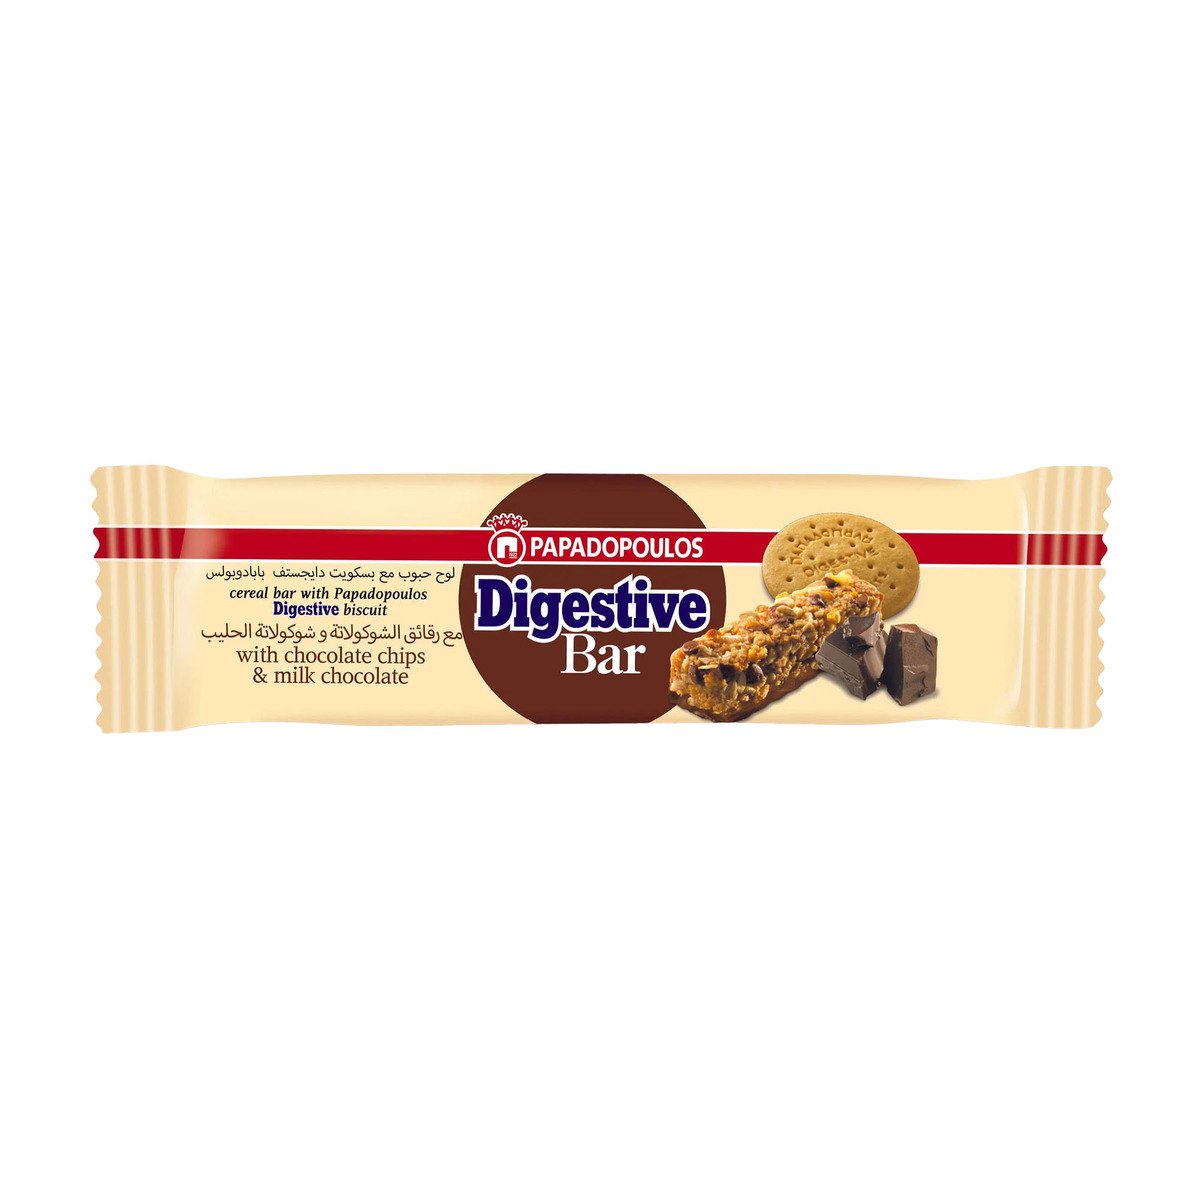 Papadopoulos Digestive Bar With Chocolate Chips & Milk Chocolate, 28 g